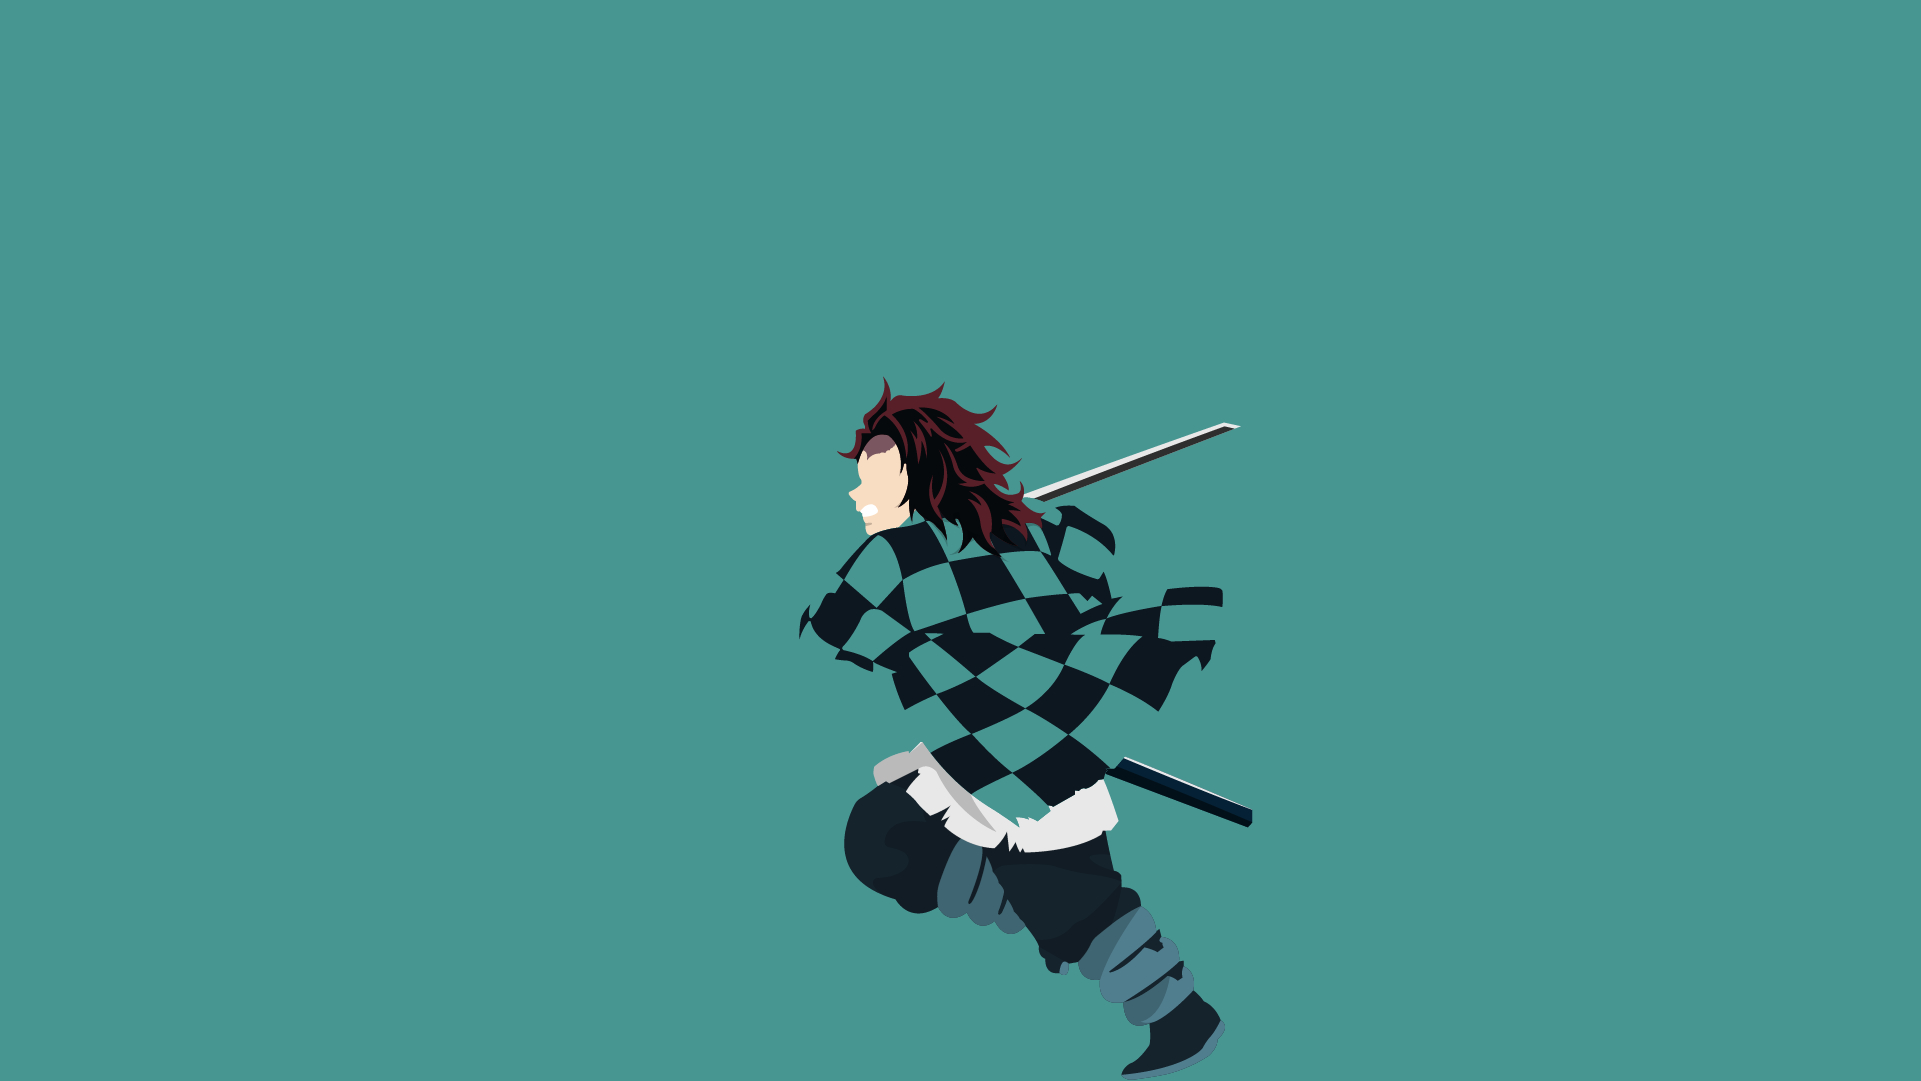 Download Image An Illustration of a Demon Slayer in a Dark Minimalistic  Setting Wallpaper  Wallpaperscom